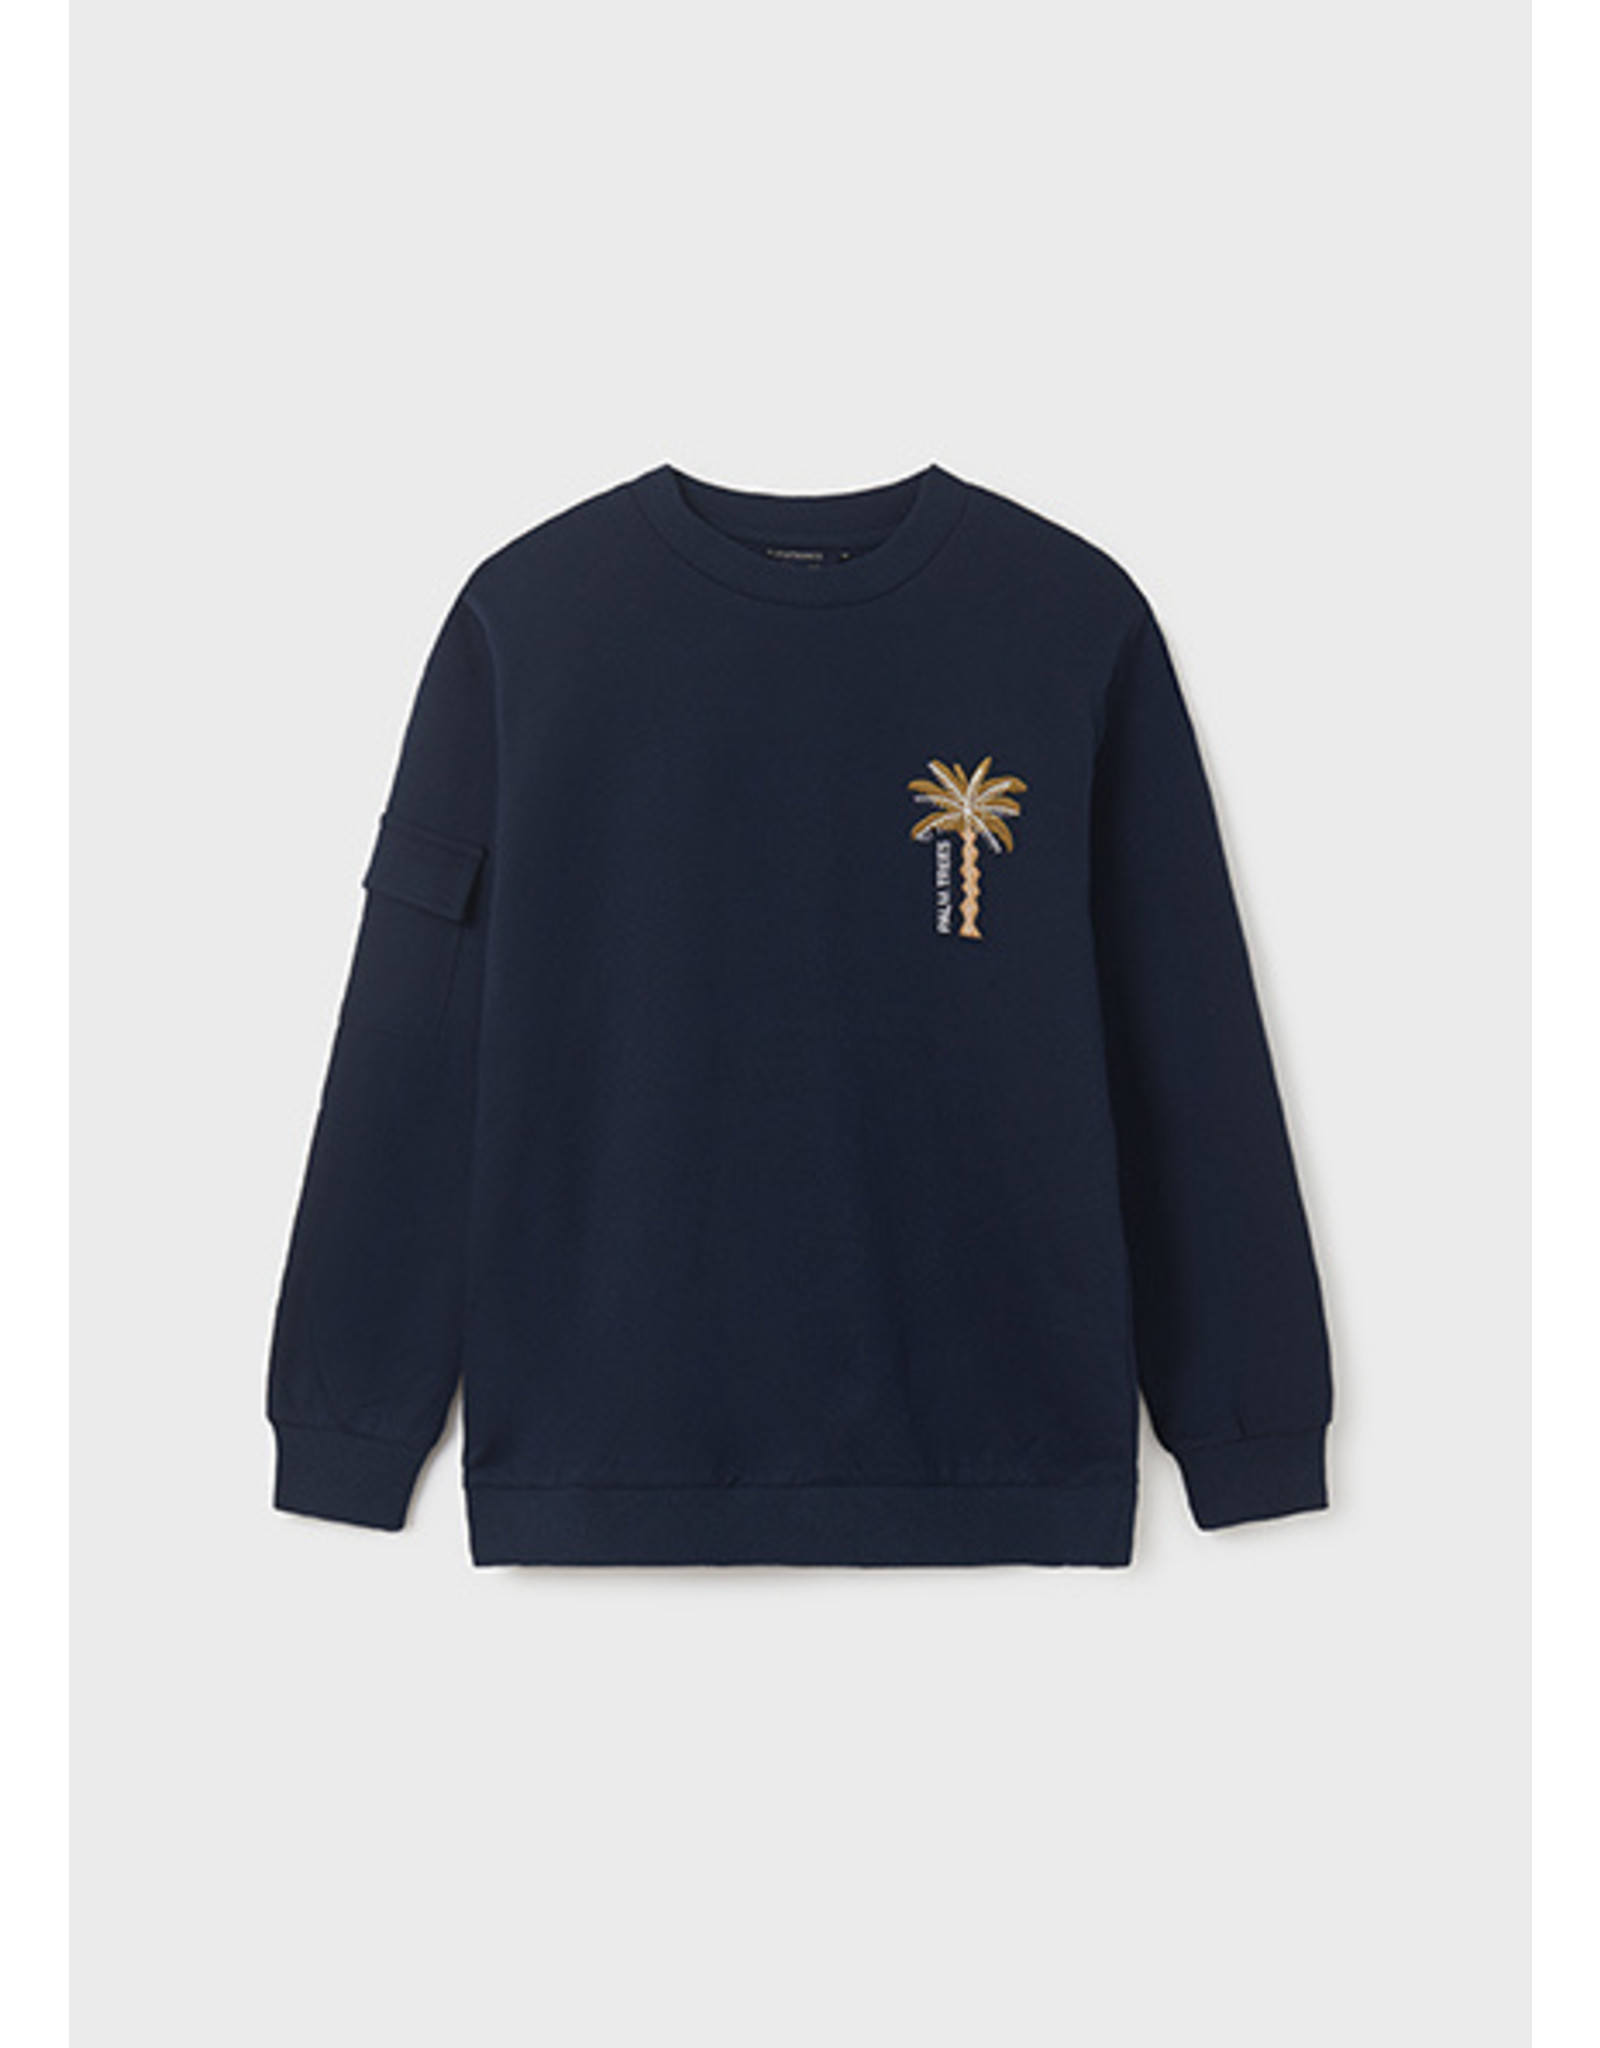 Mayoral navy sweater palmboom